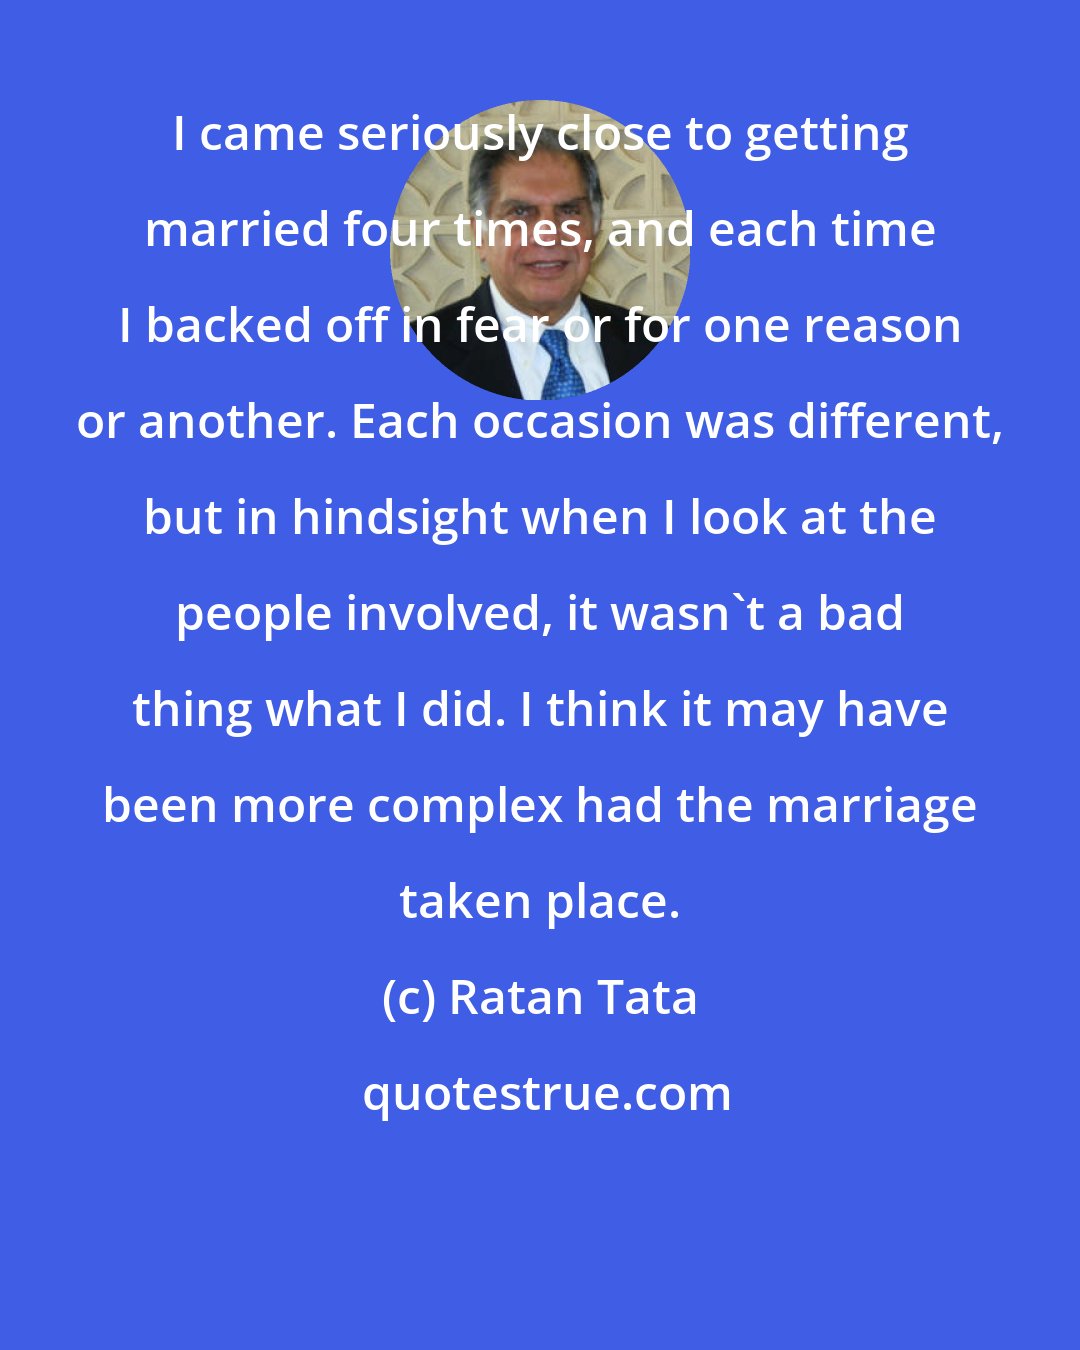 Ratan Tata: I came seriously close to getting married four times, and each time I backed off in fear or for one reason or another. Each occasion was different, but in hindsight when I look at the people involved, it wasn't a bad thing what I did. I think it may have been more complex had the marriage taken place.